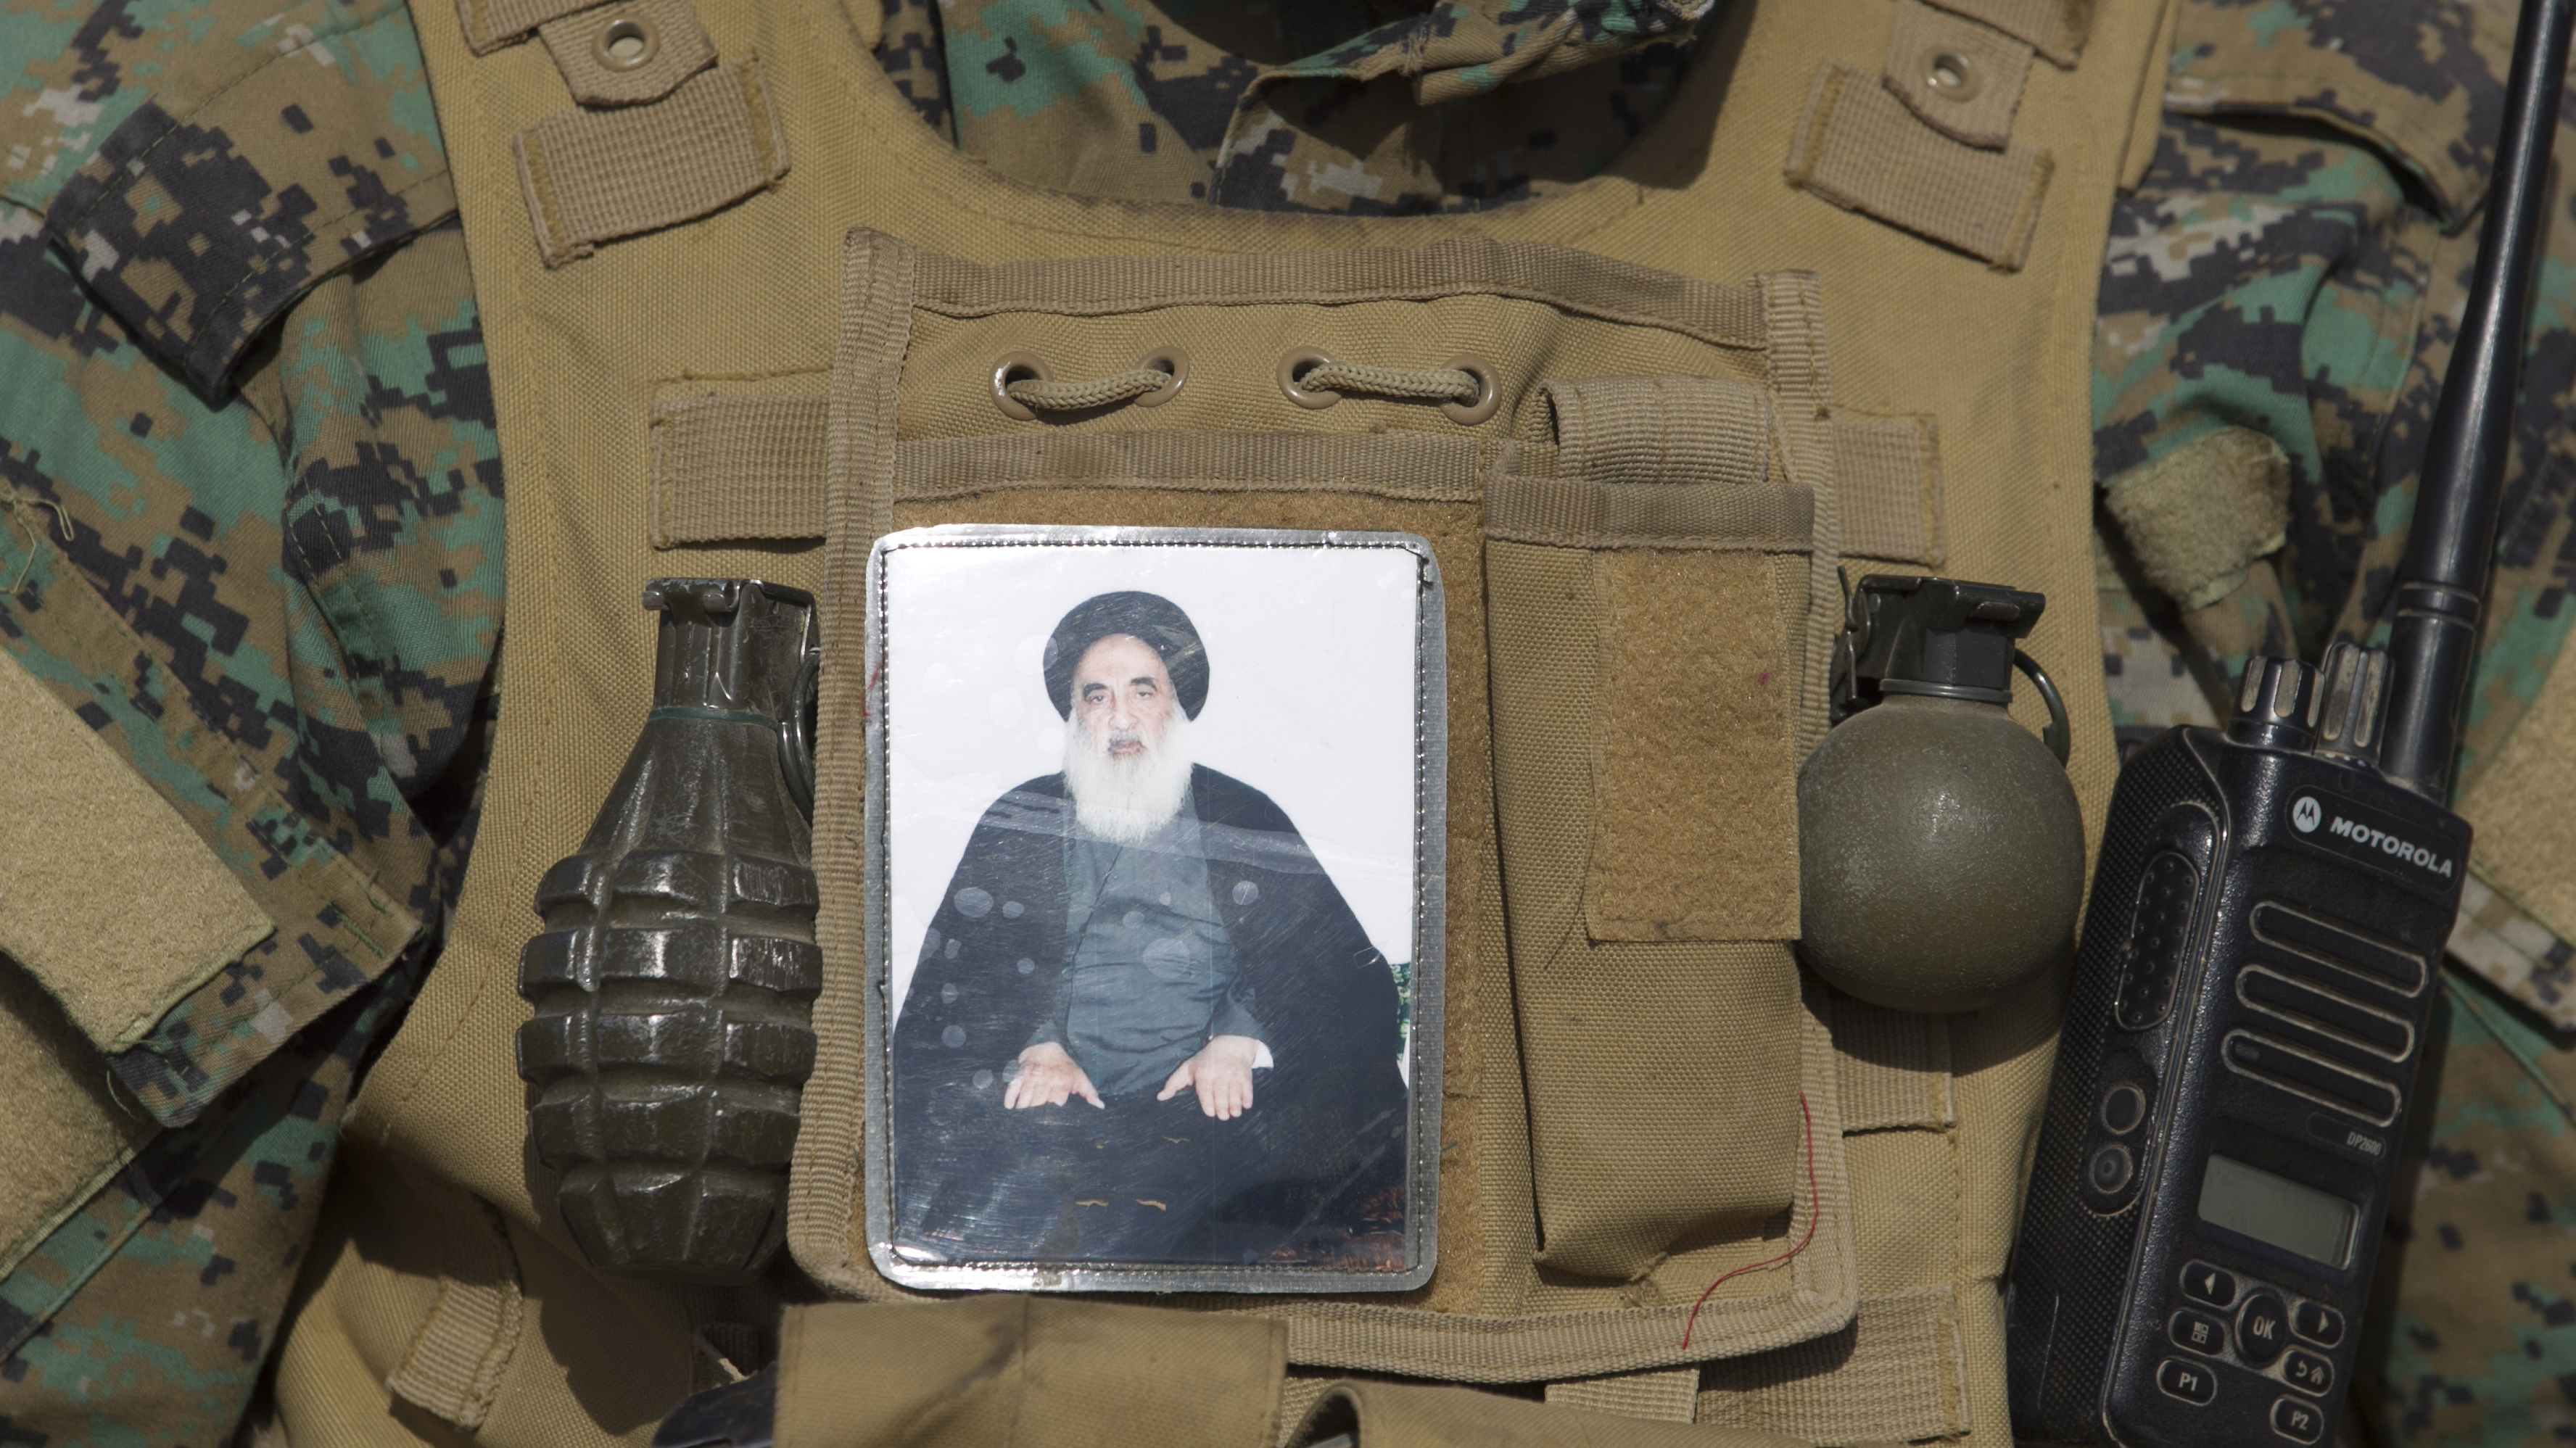 An Iraqi Shiite fighter from the Popular Mobilization Units wears an image of Iraqi Ayatollah Ali al-Sistani on his vest during the advance against Islamic State forces near the village of Tal Faris, Nov. 29, 2016 (photo by Ahmad al-Rubaye/AFP/Getty Images)